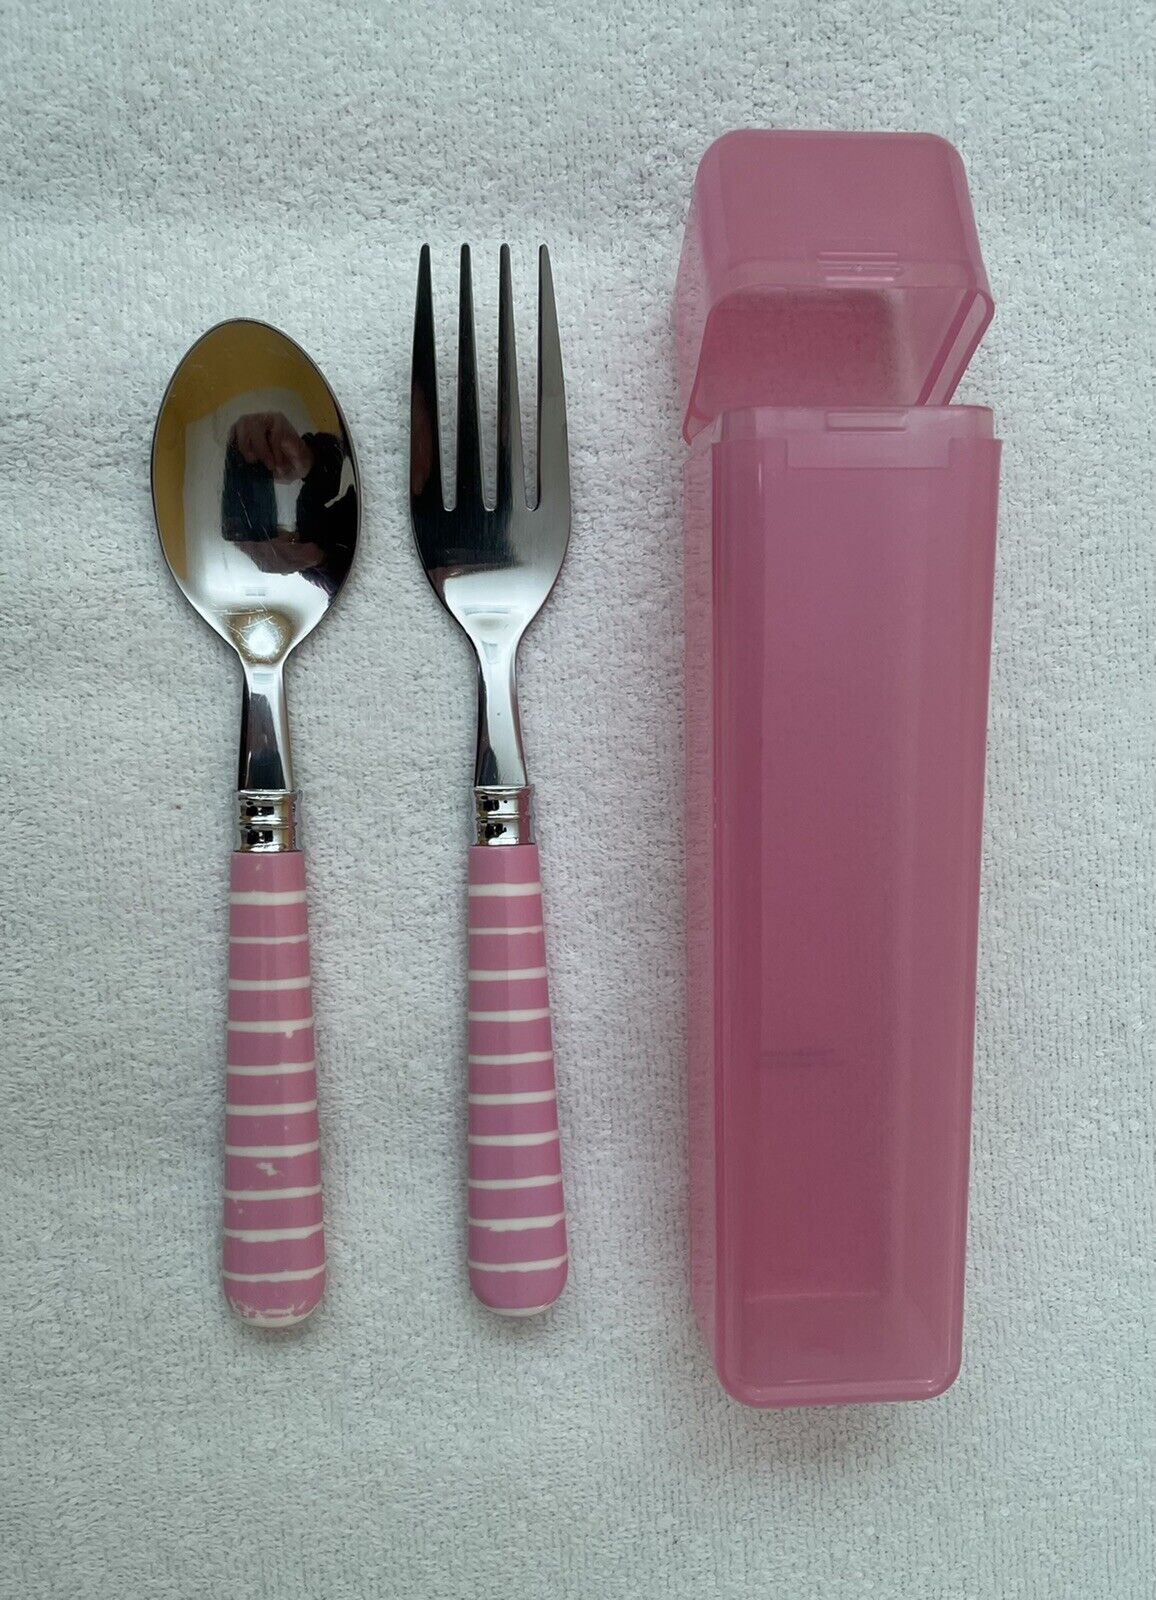 Pottery Barn Kids Utensils Stainless Steel Fork,spoon & Carry Case For Lunch Box